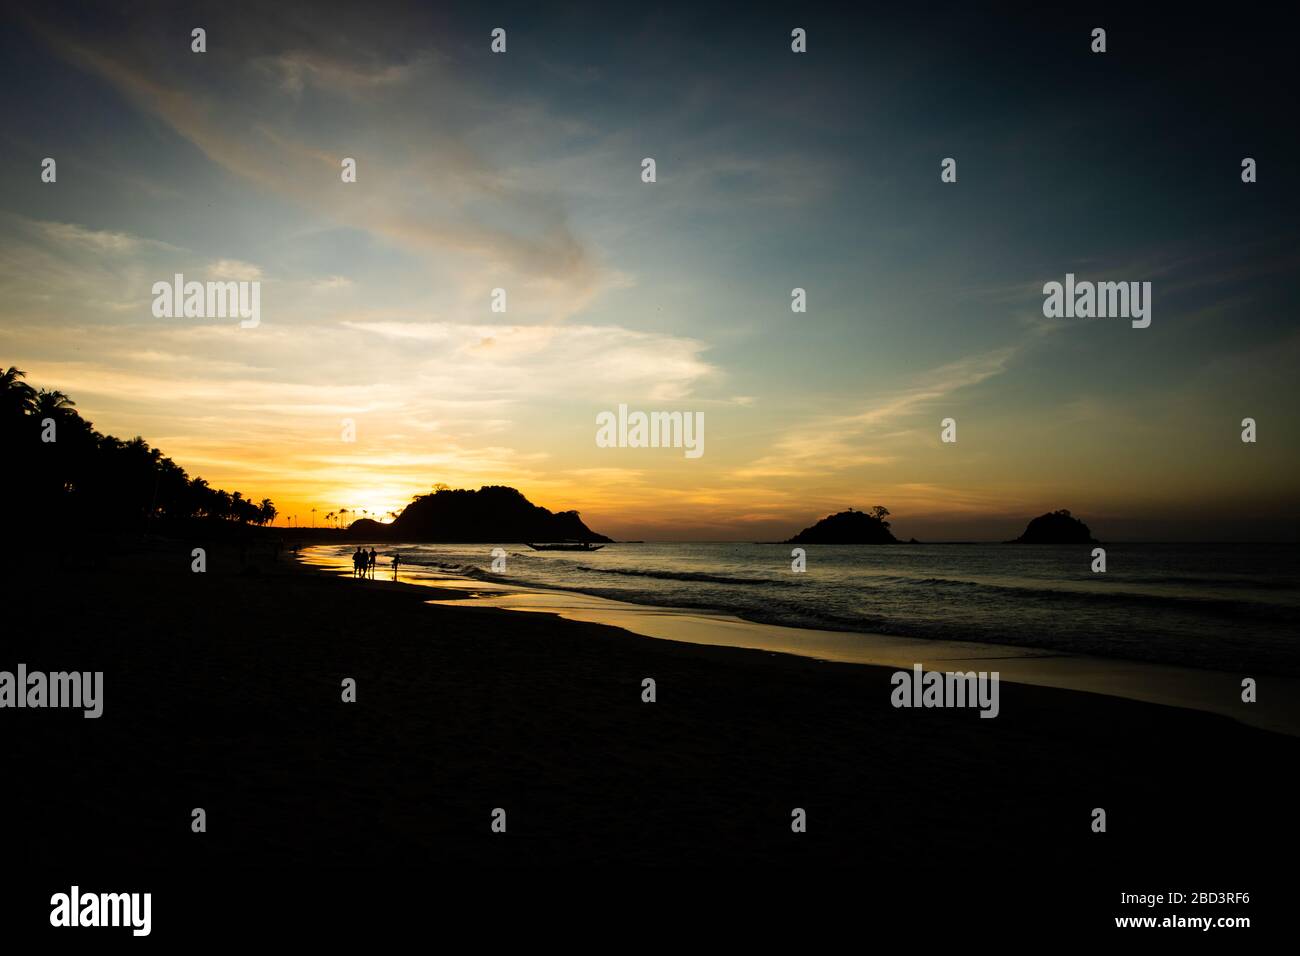 Islands silhouetted at twilight on Nacpan Beach in El Nido, Palawan, Philippines Stock Photo